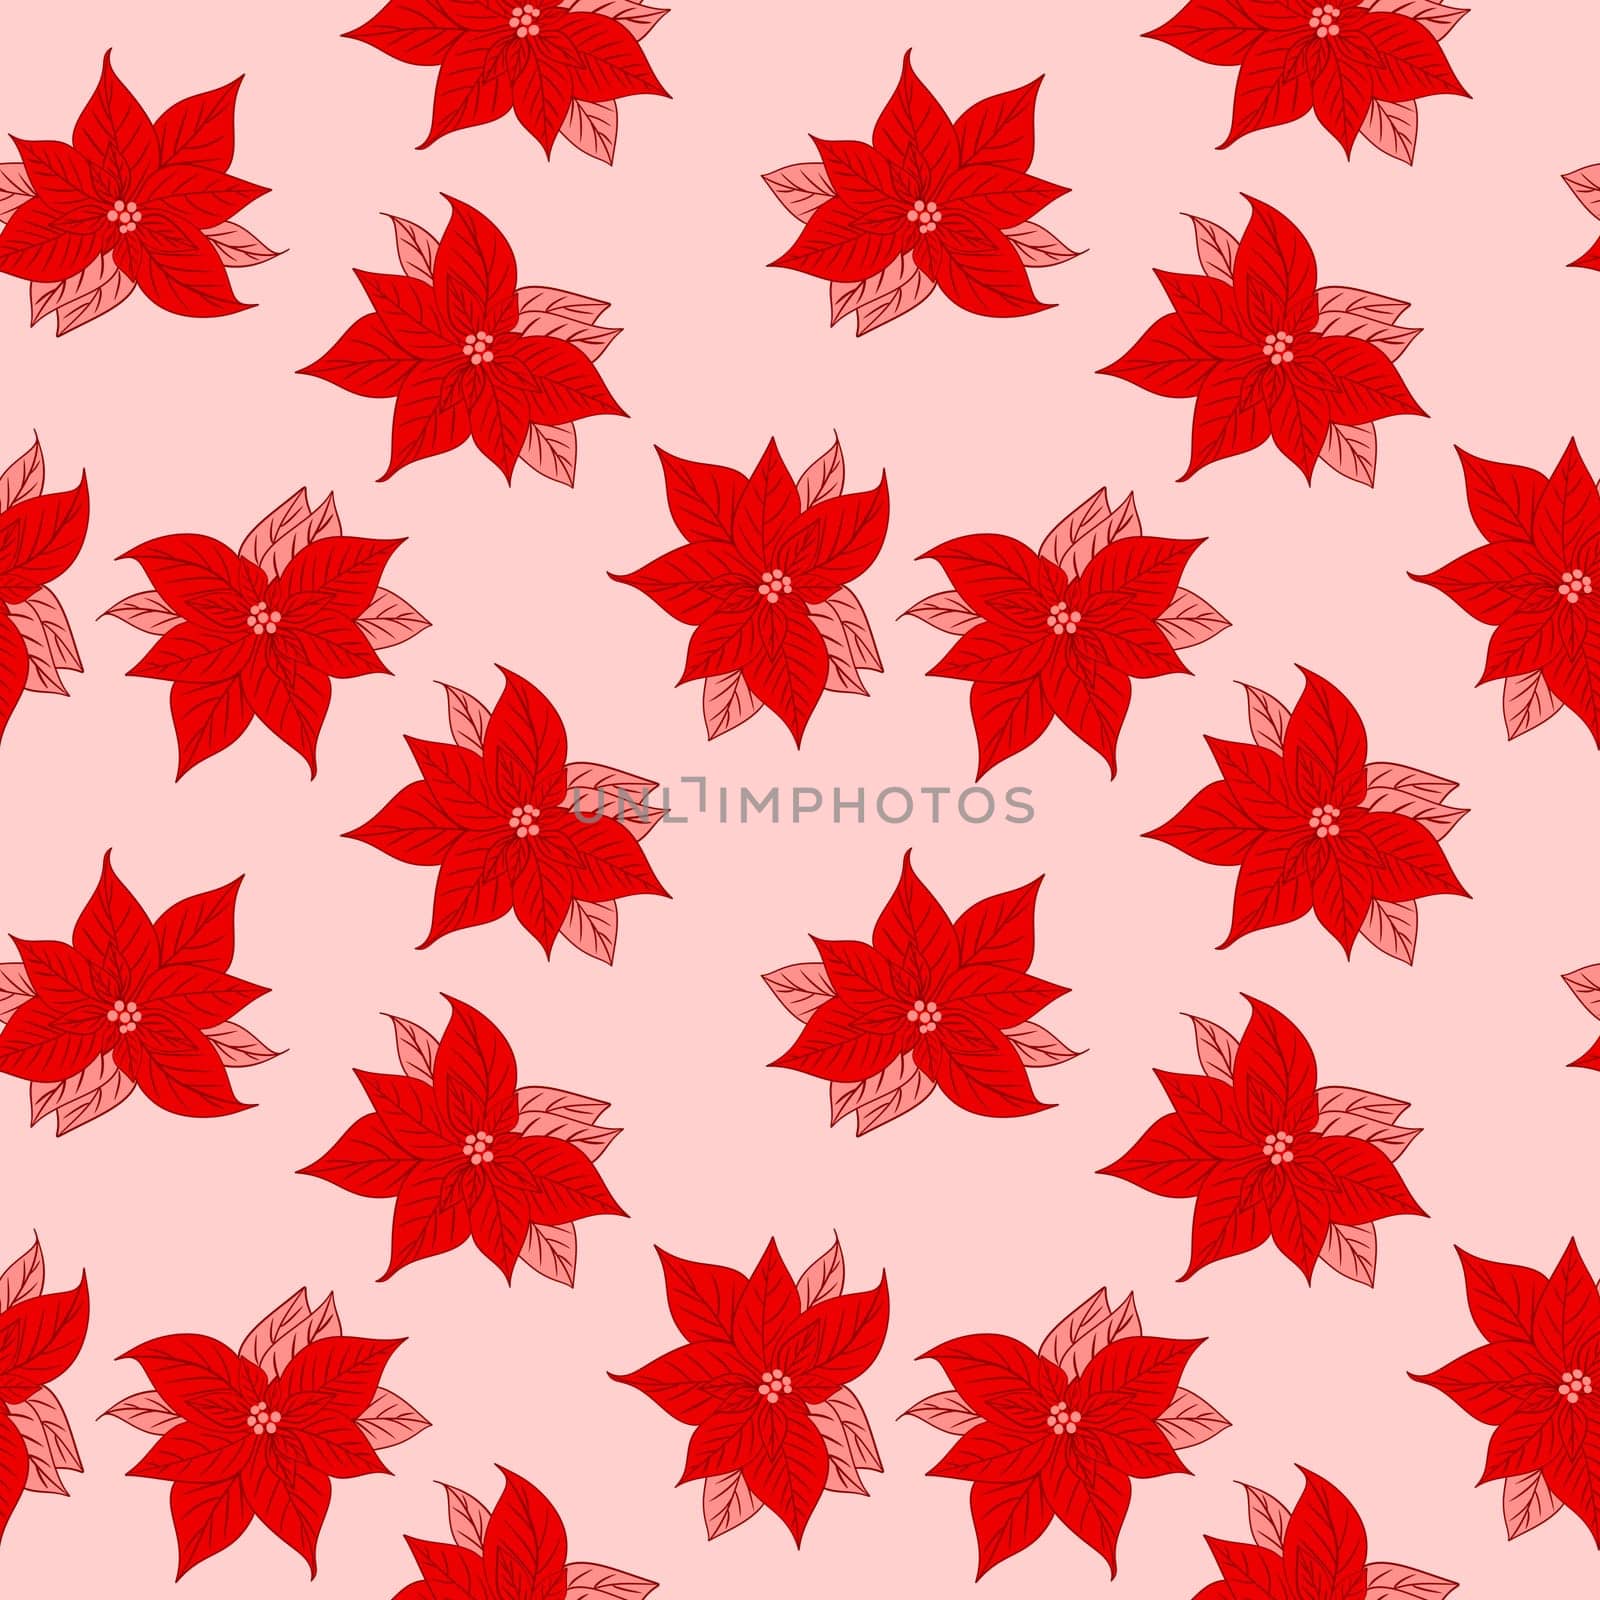 Seamless hand drawn pattern with pink red poinsettia Christmas star flowers winter floral print, red pink crimson vermilion on white background, for new year wrapping paper textile botanical decor art